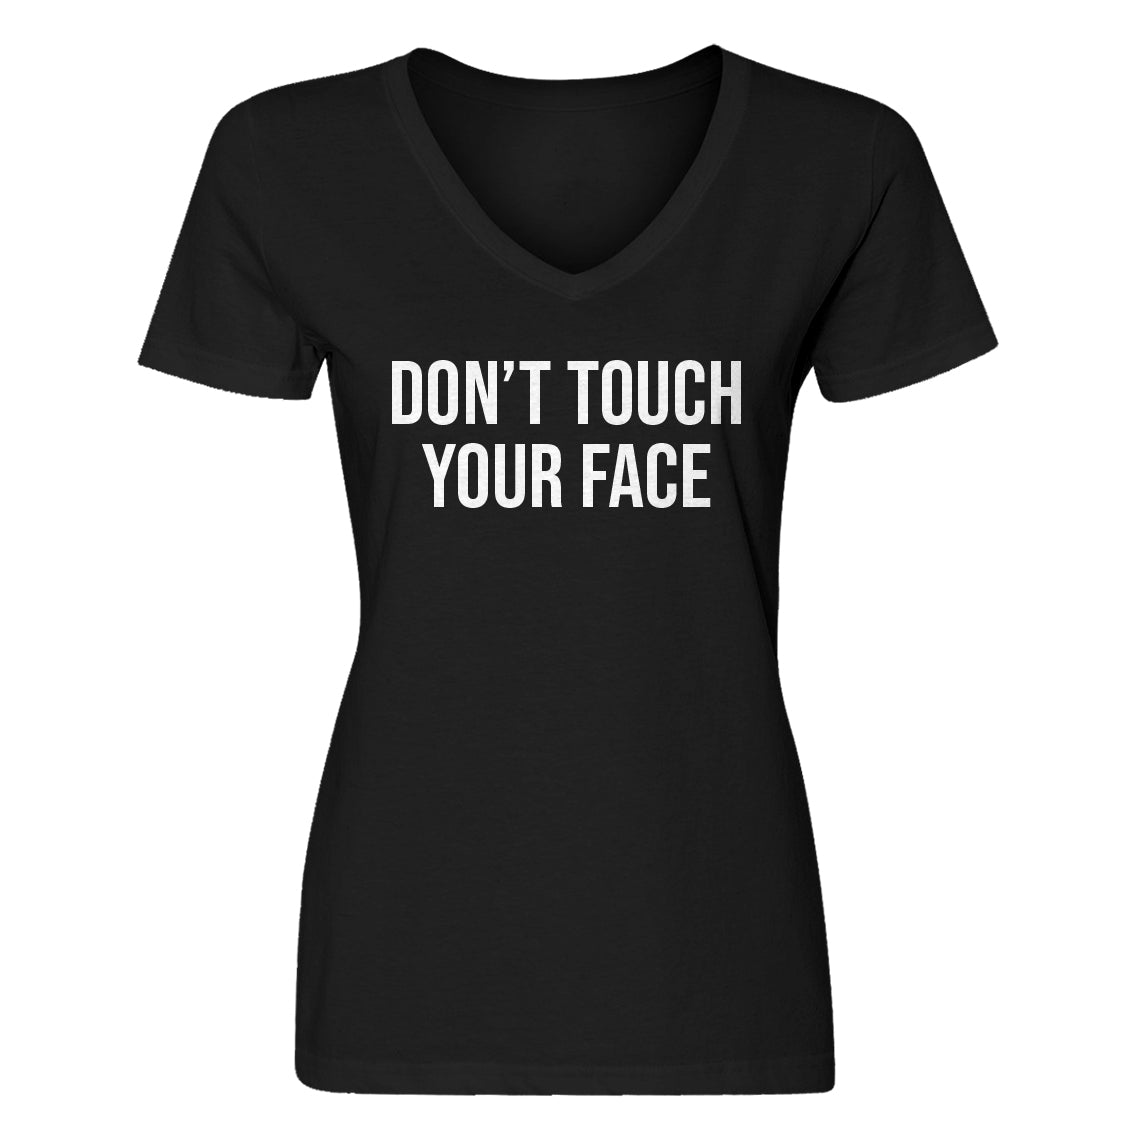 Womens DON'T TOUCH YOUR FACE V-Neck T-shirt